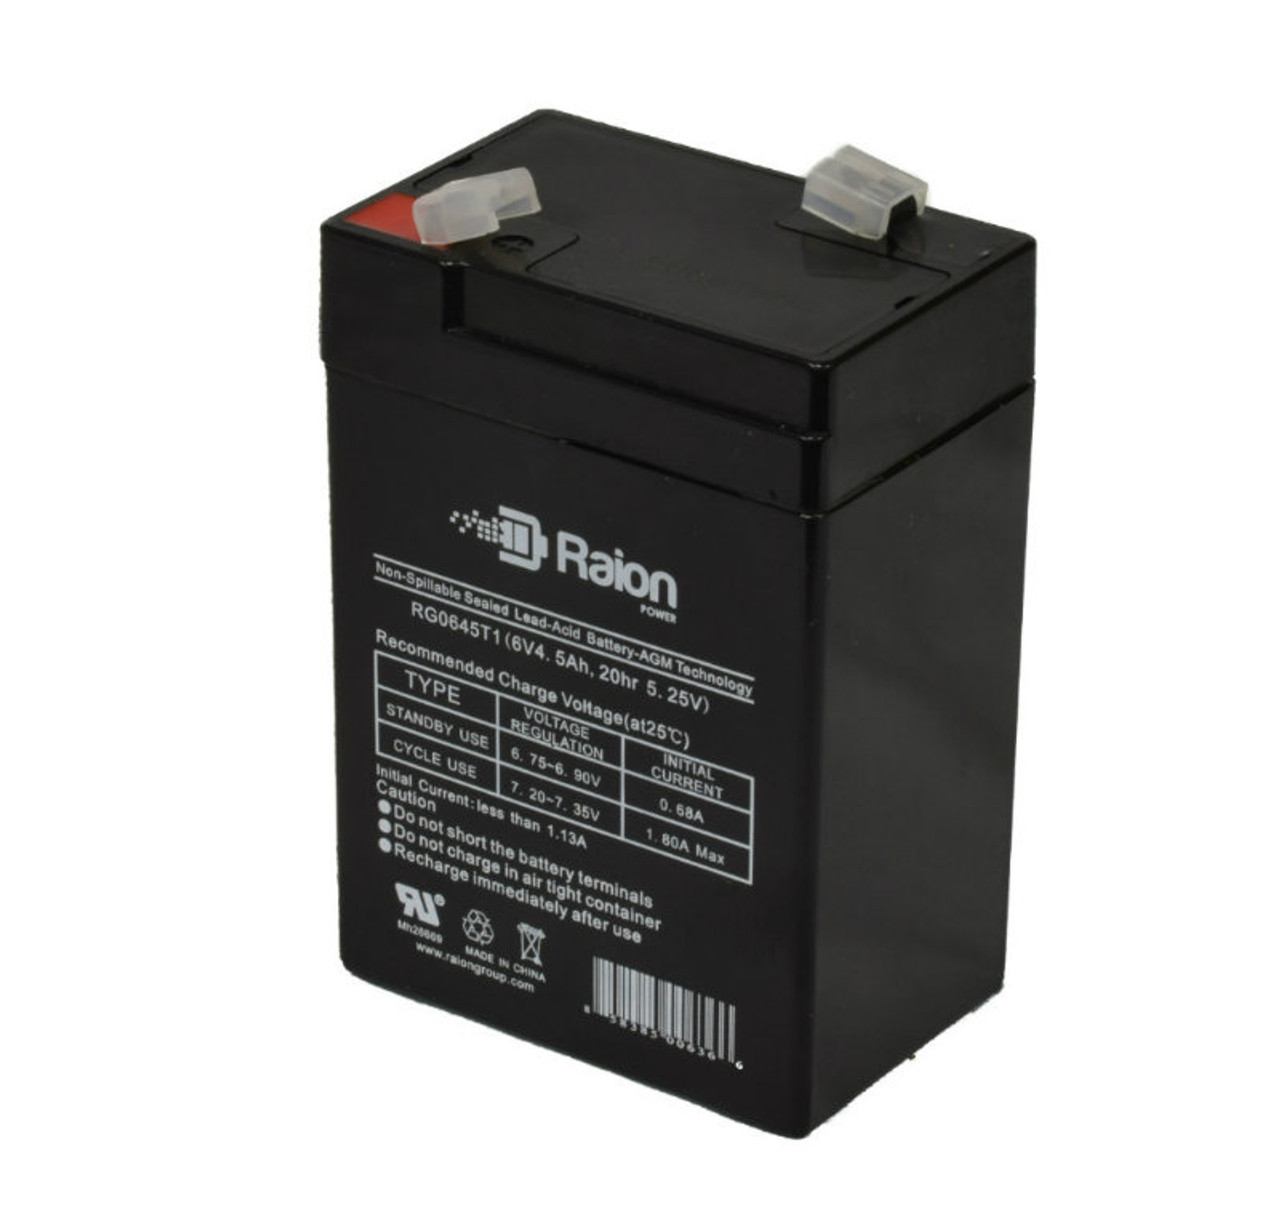 Raion Power RG0645T1 6V 4.5Ah Replacement Battery Cartridge for Trio TL930007